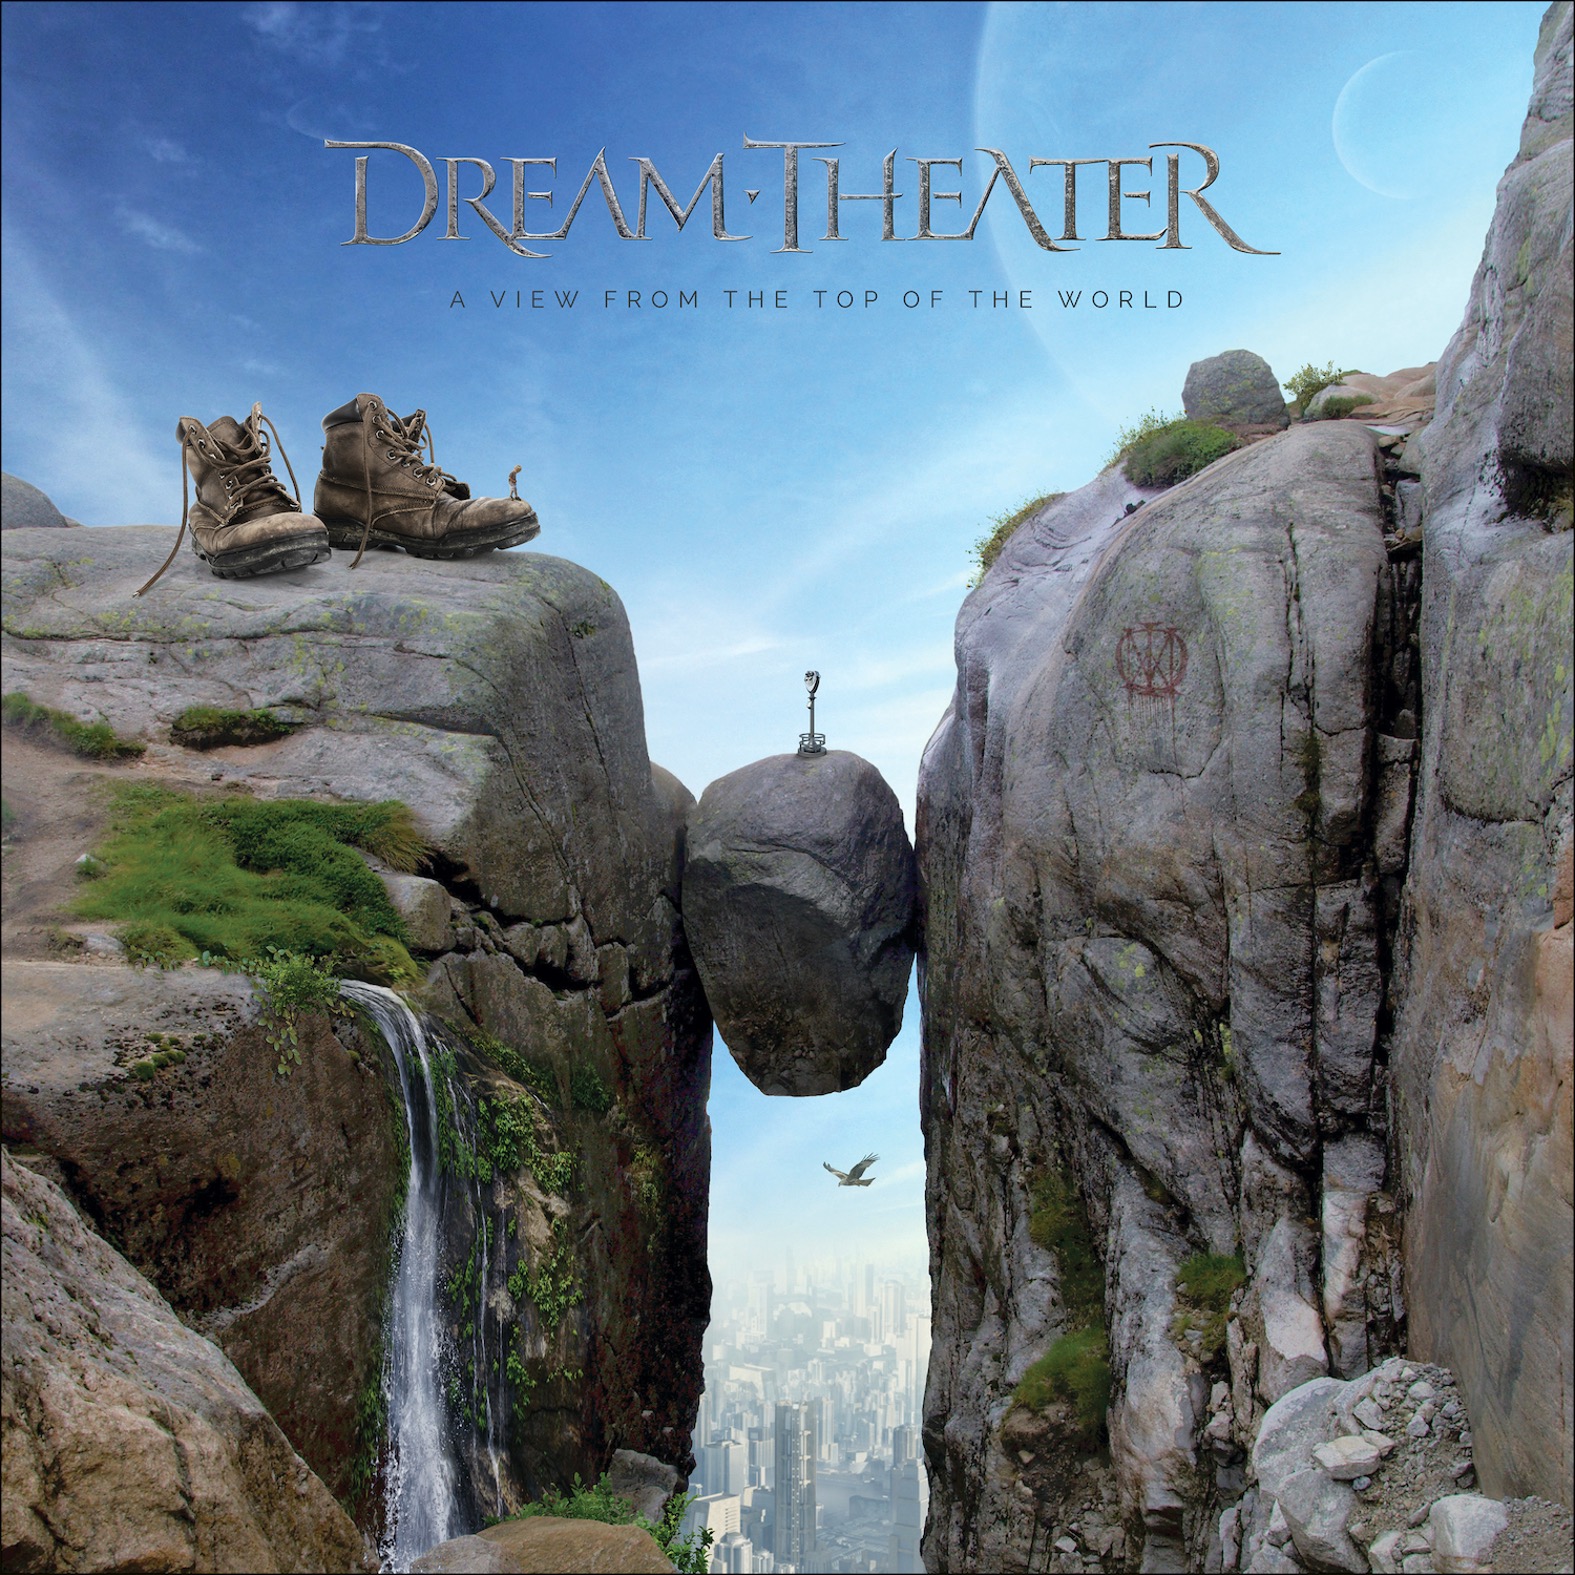 Dream Theatre is thrilled to welcome the worlds most downloaded